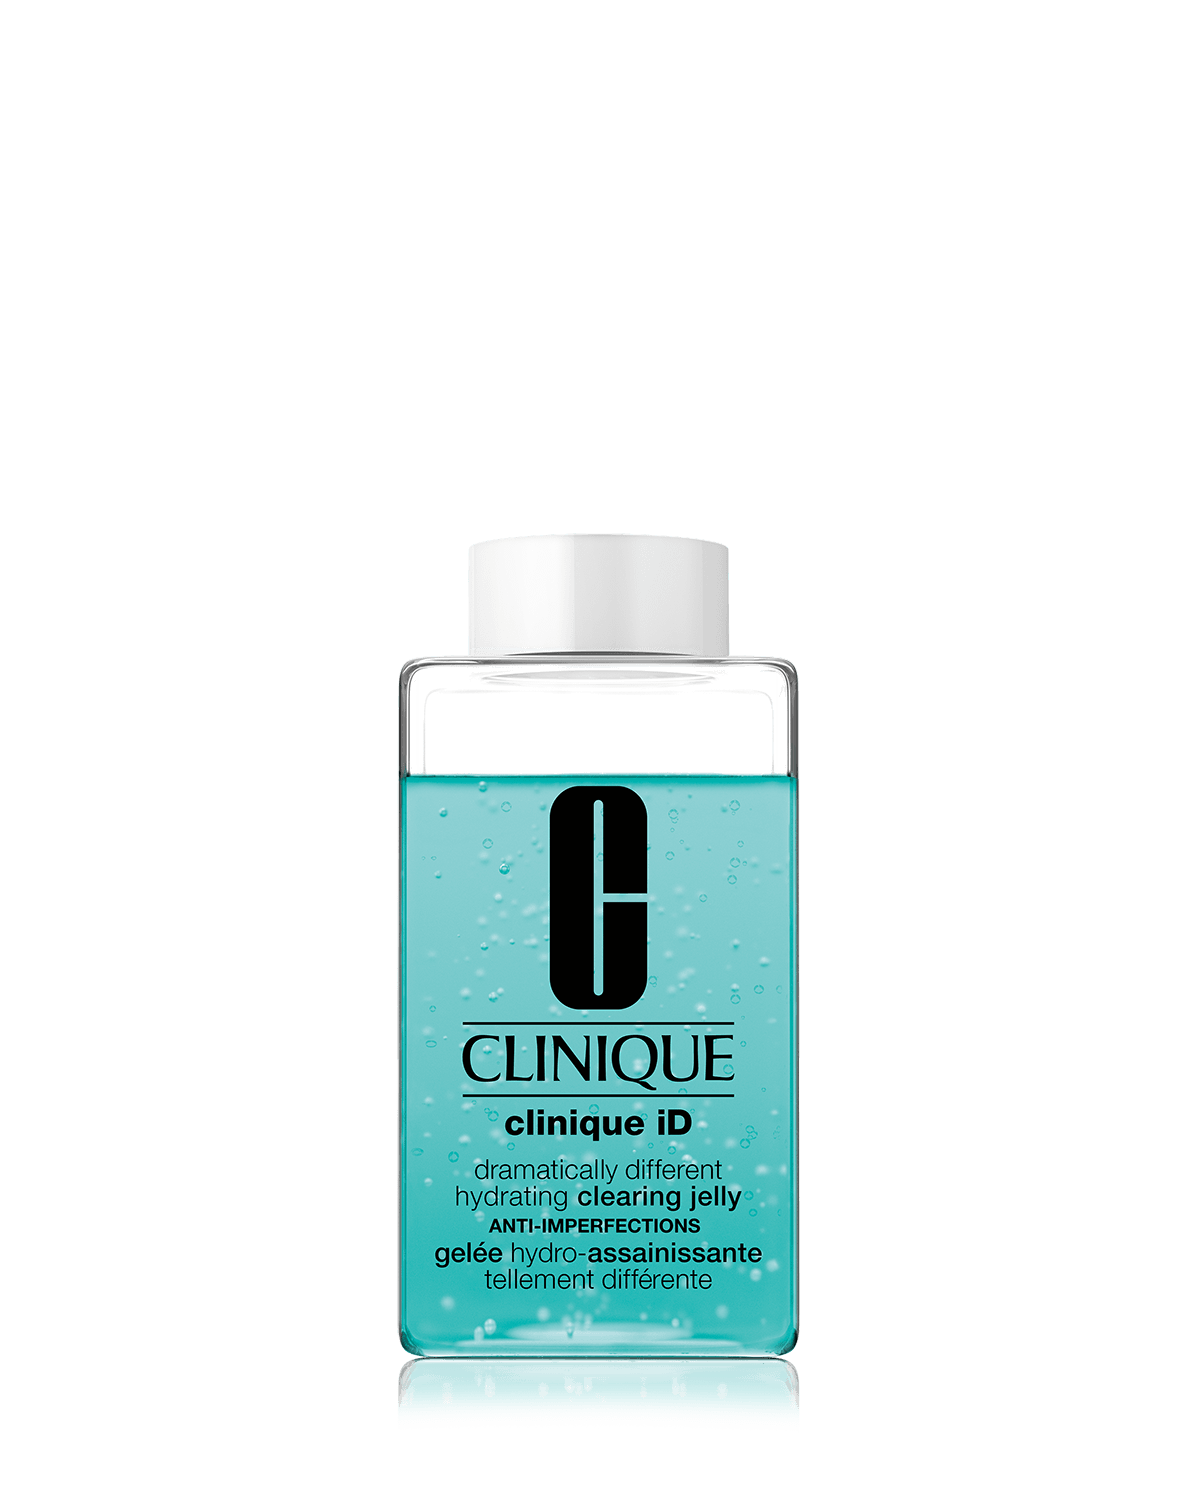 Clinique iD™ Dramatically Different Hydrating Clearing Jelly